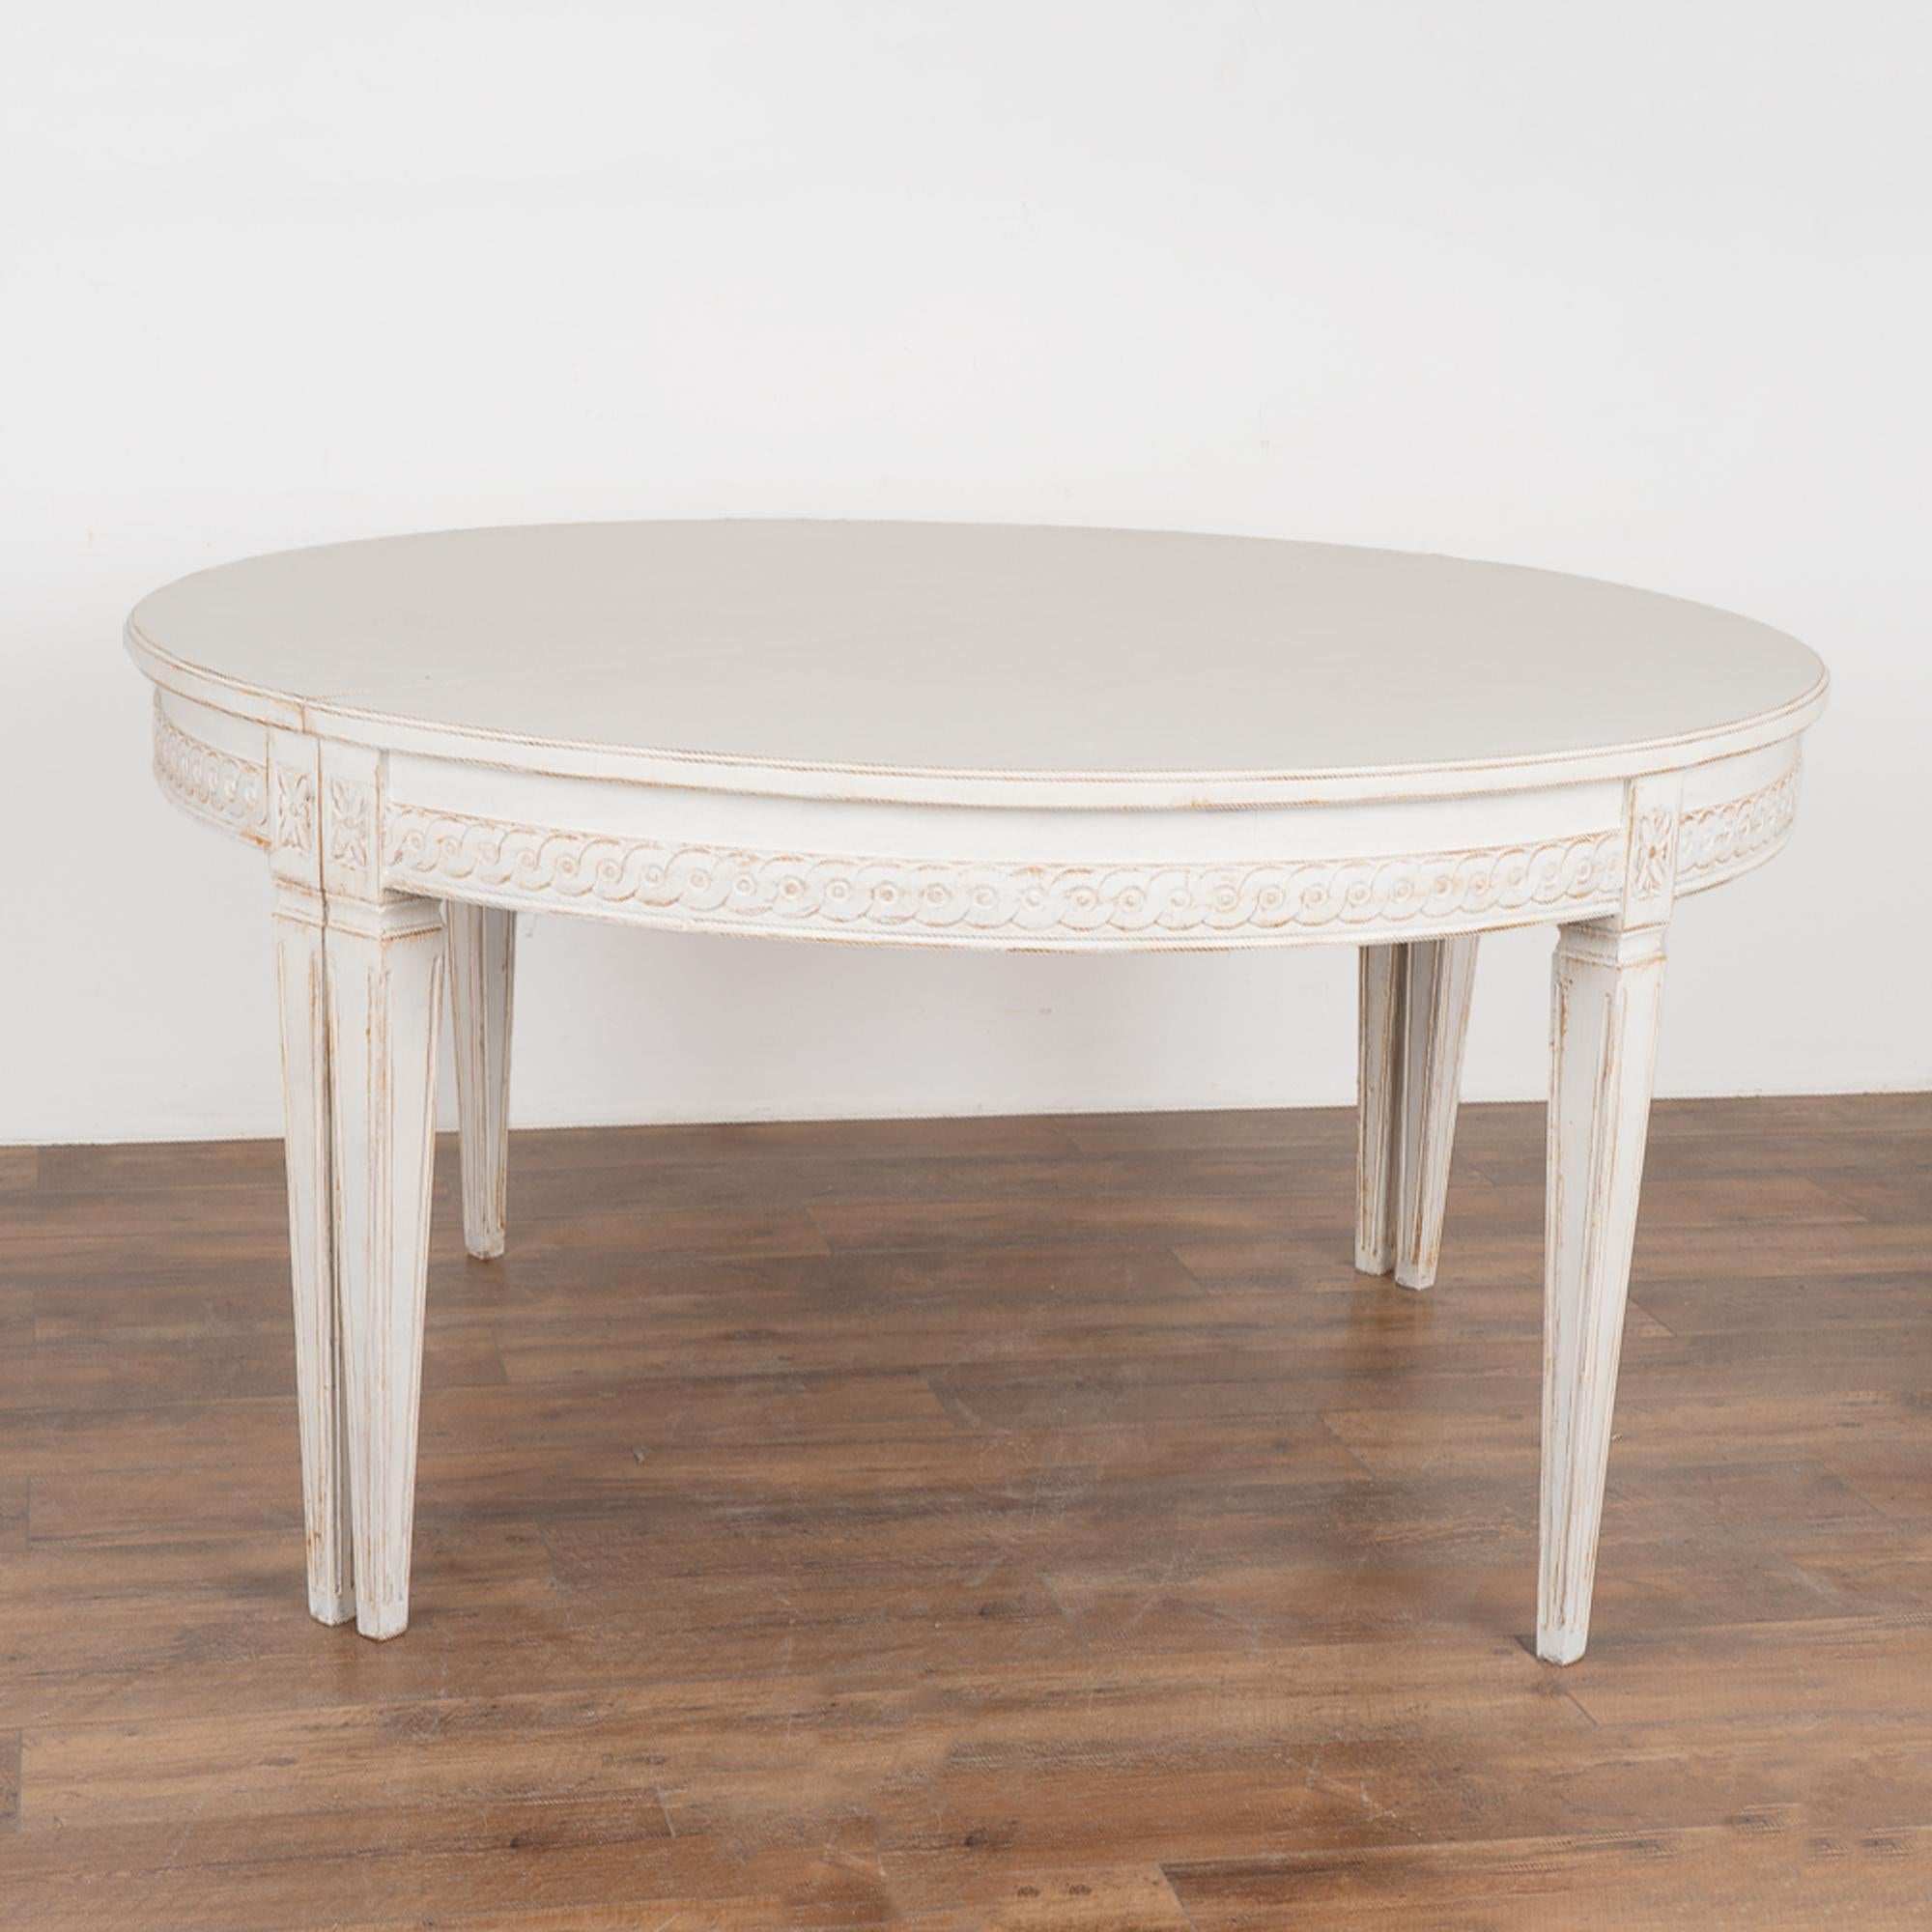 Swedish White Oval Dining Table With Three Leaves, Sweden circa 1860-80 For Sale